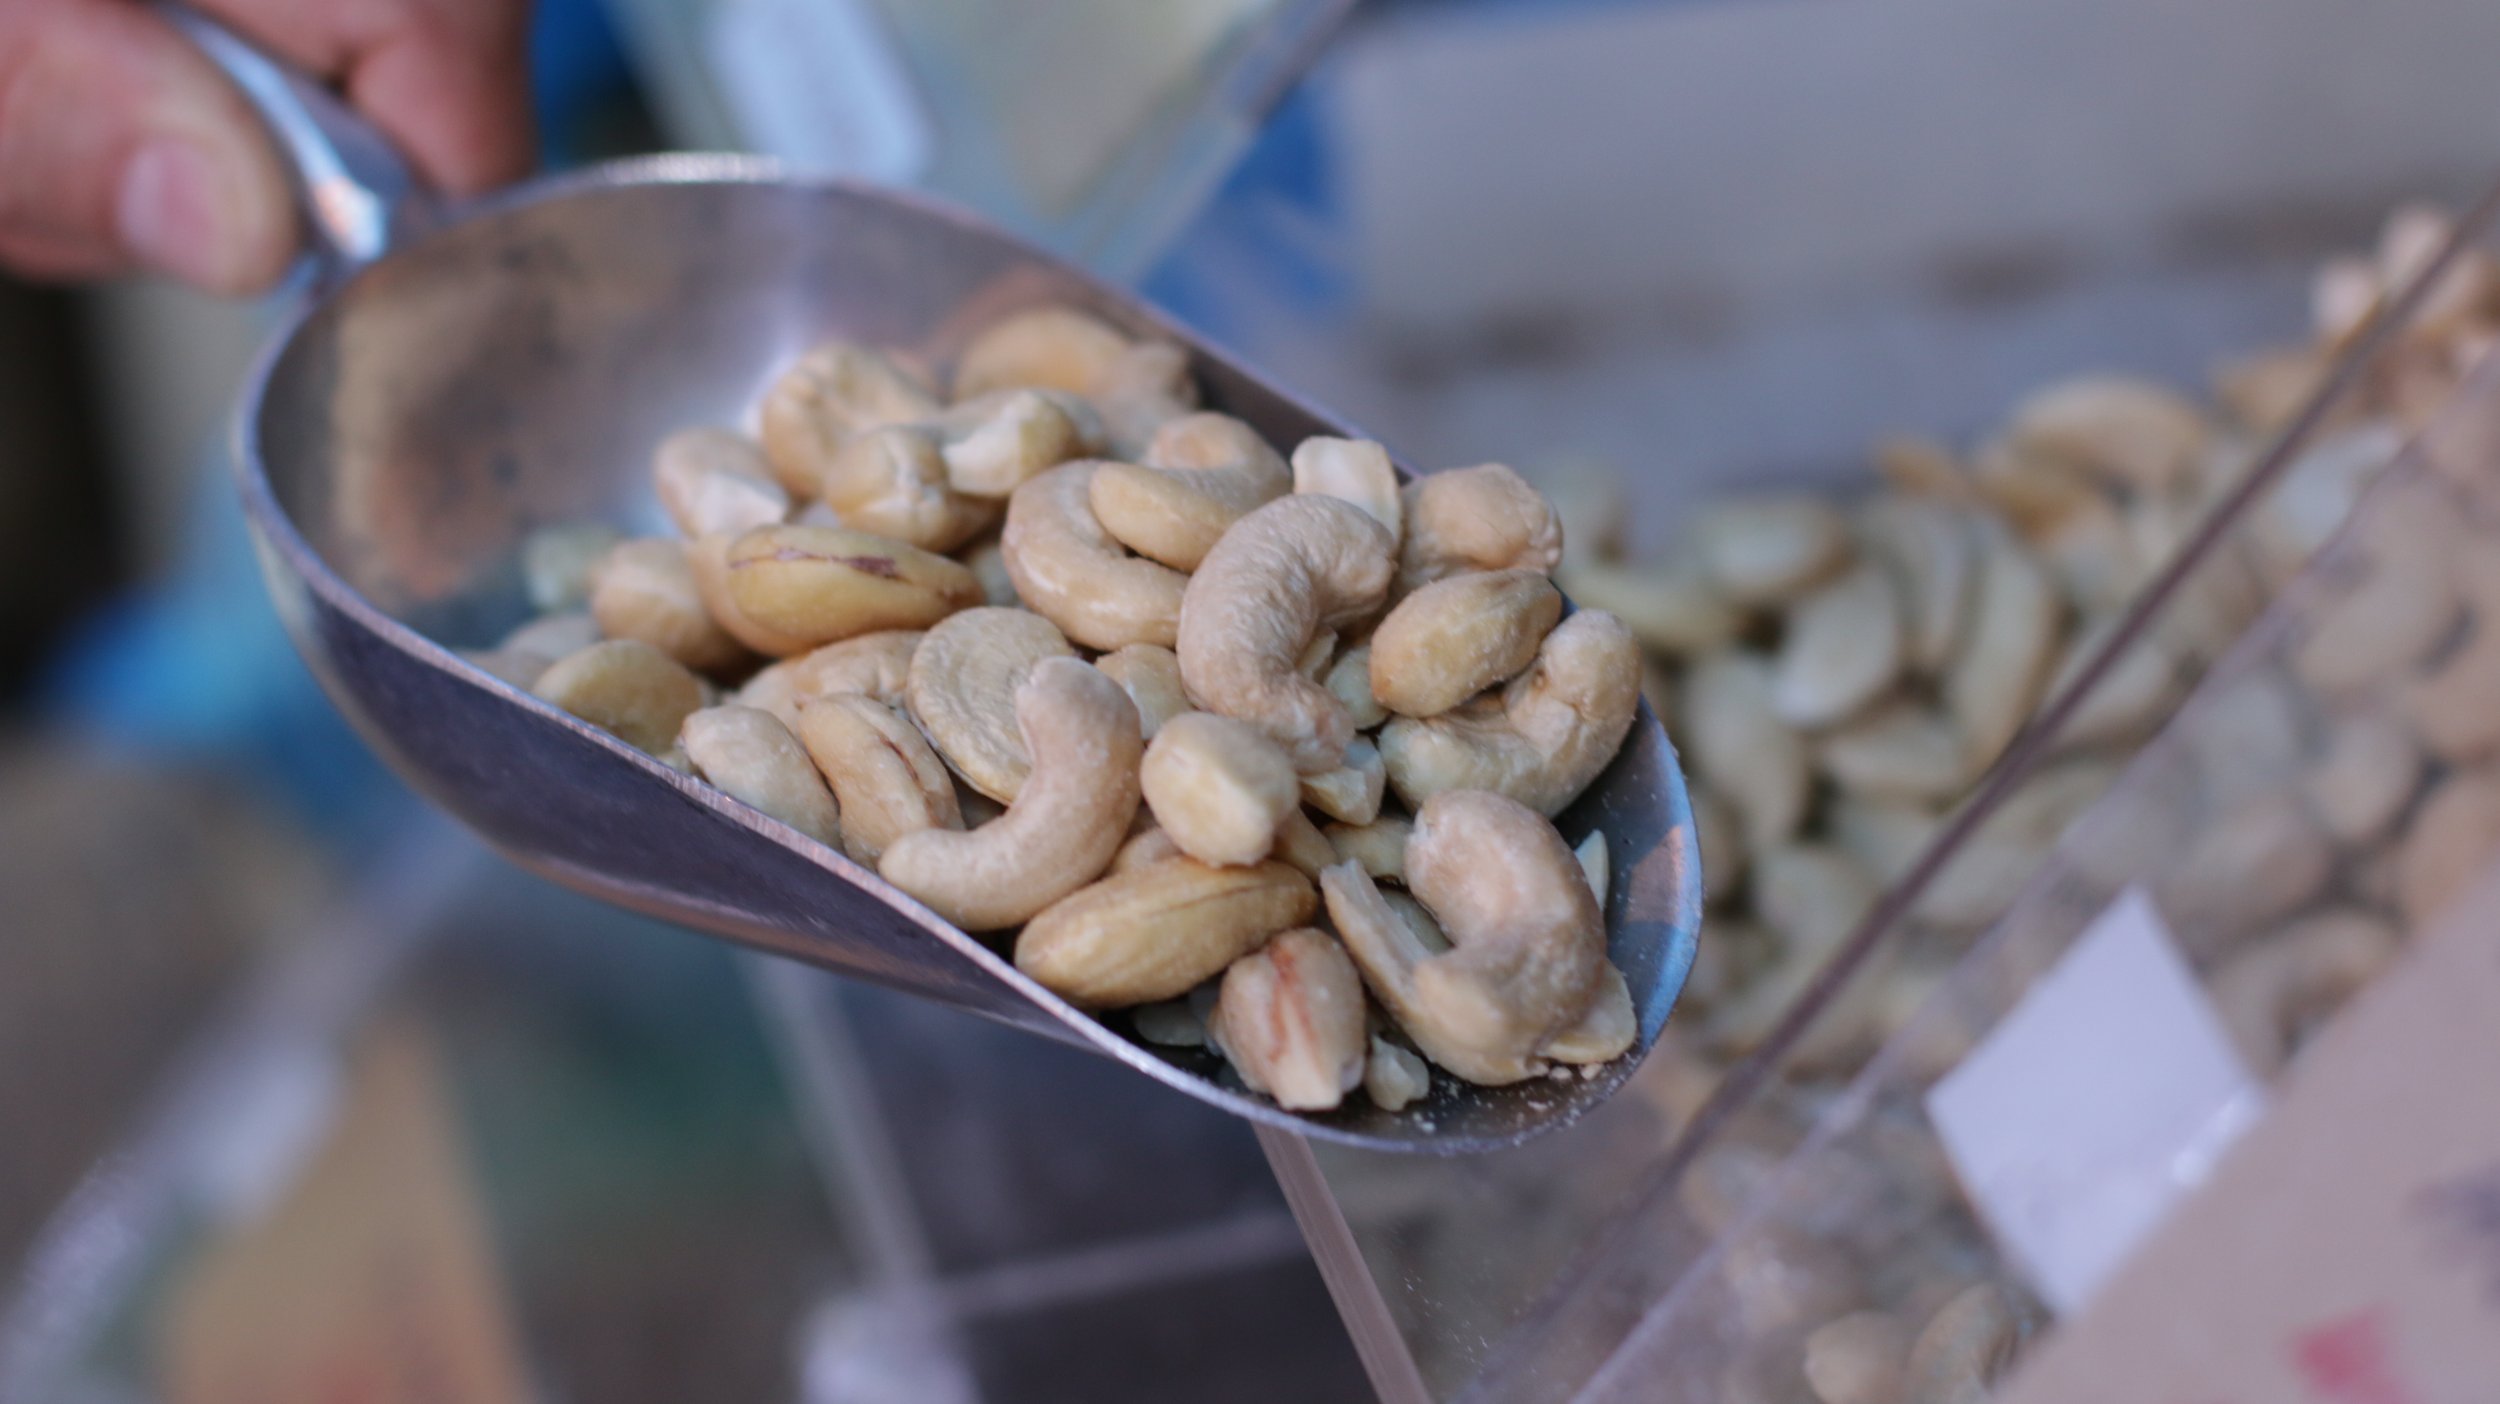 Cashew nuts with scoop close up.JPG